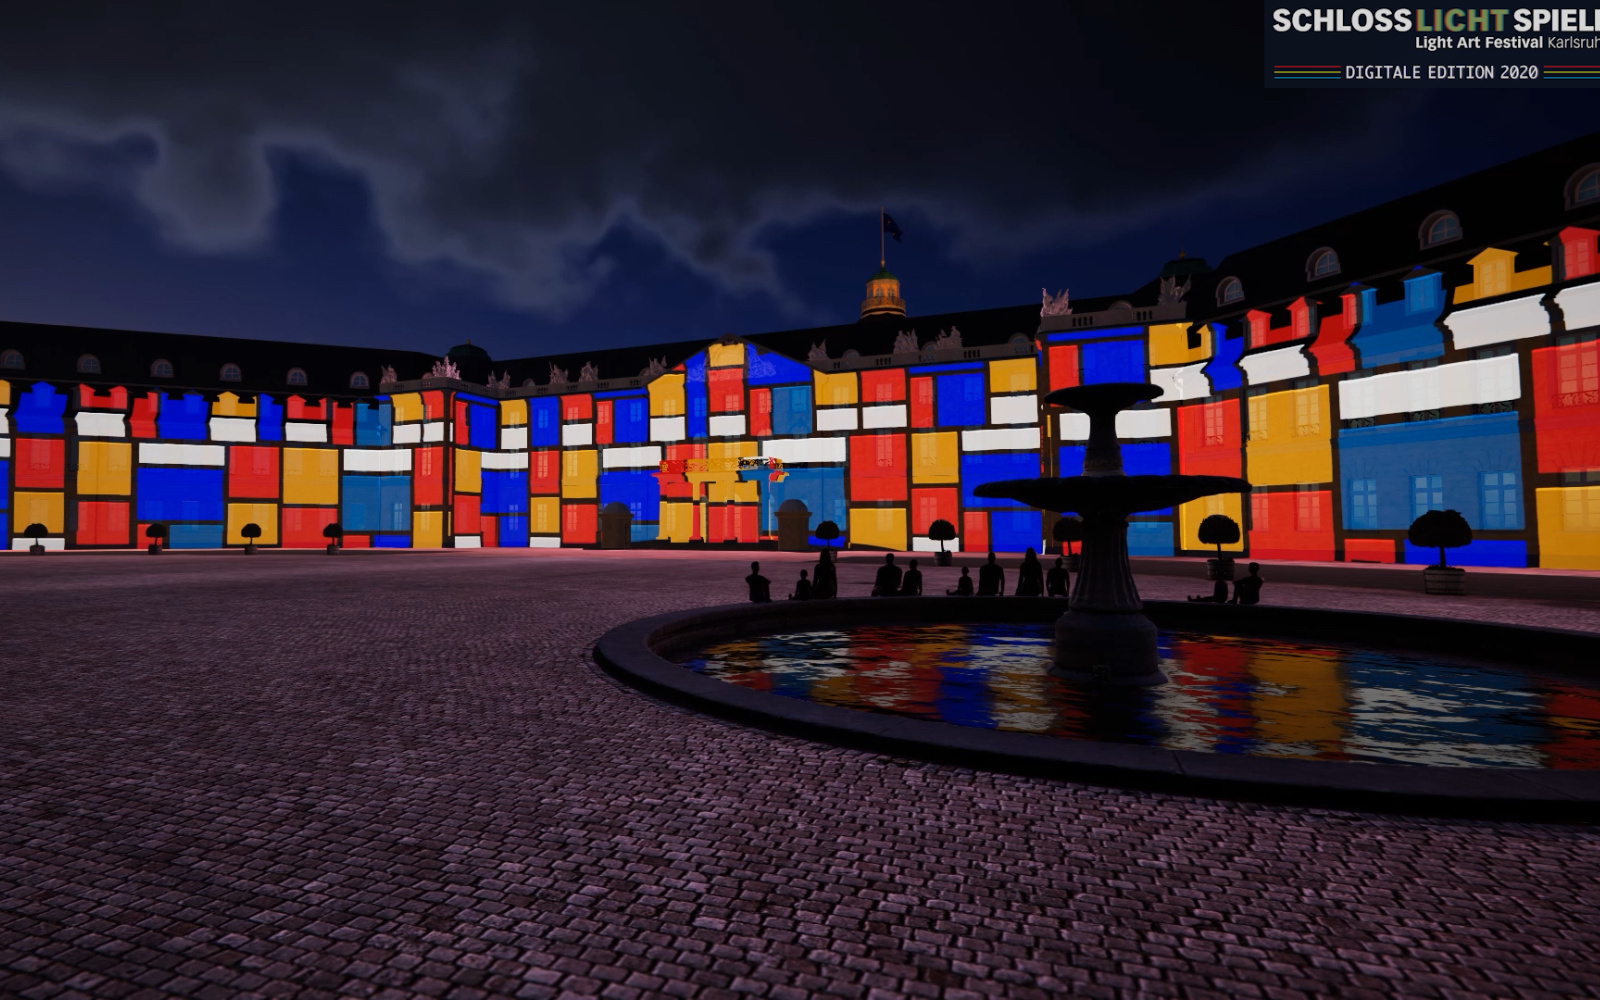 The Karlsruhe palace is digitally reconstructed. Many coloured squares are projected onto its surface. In the front right is a fountain with a few people sitting at its edge. It is an extremely realistic image